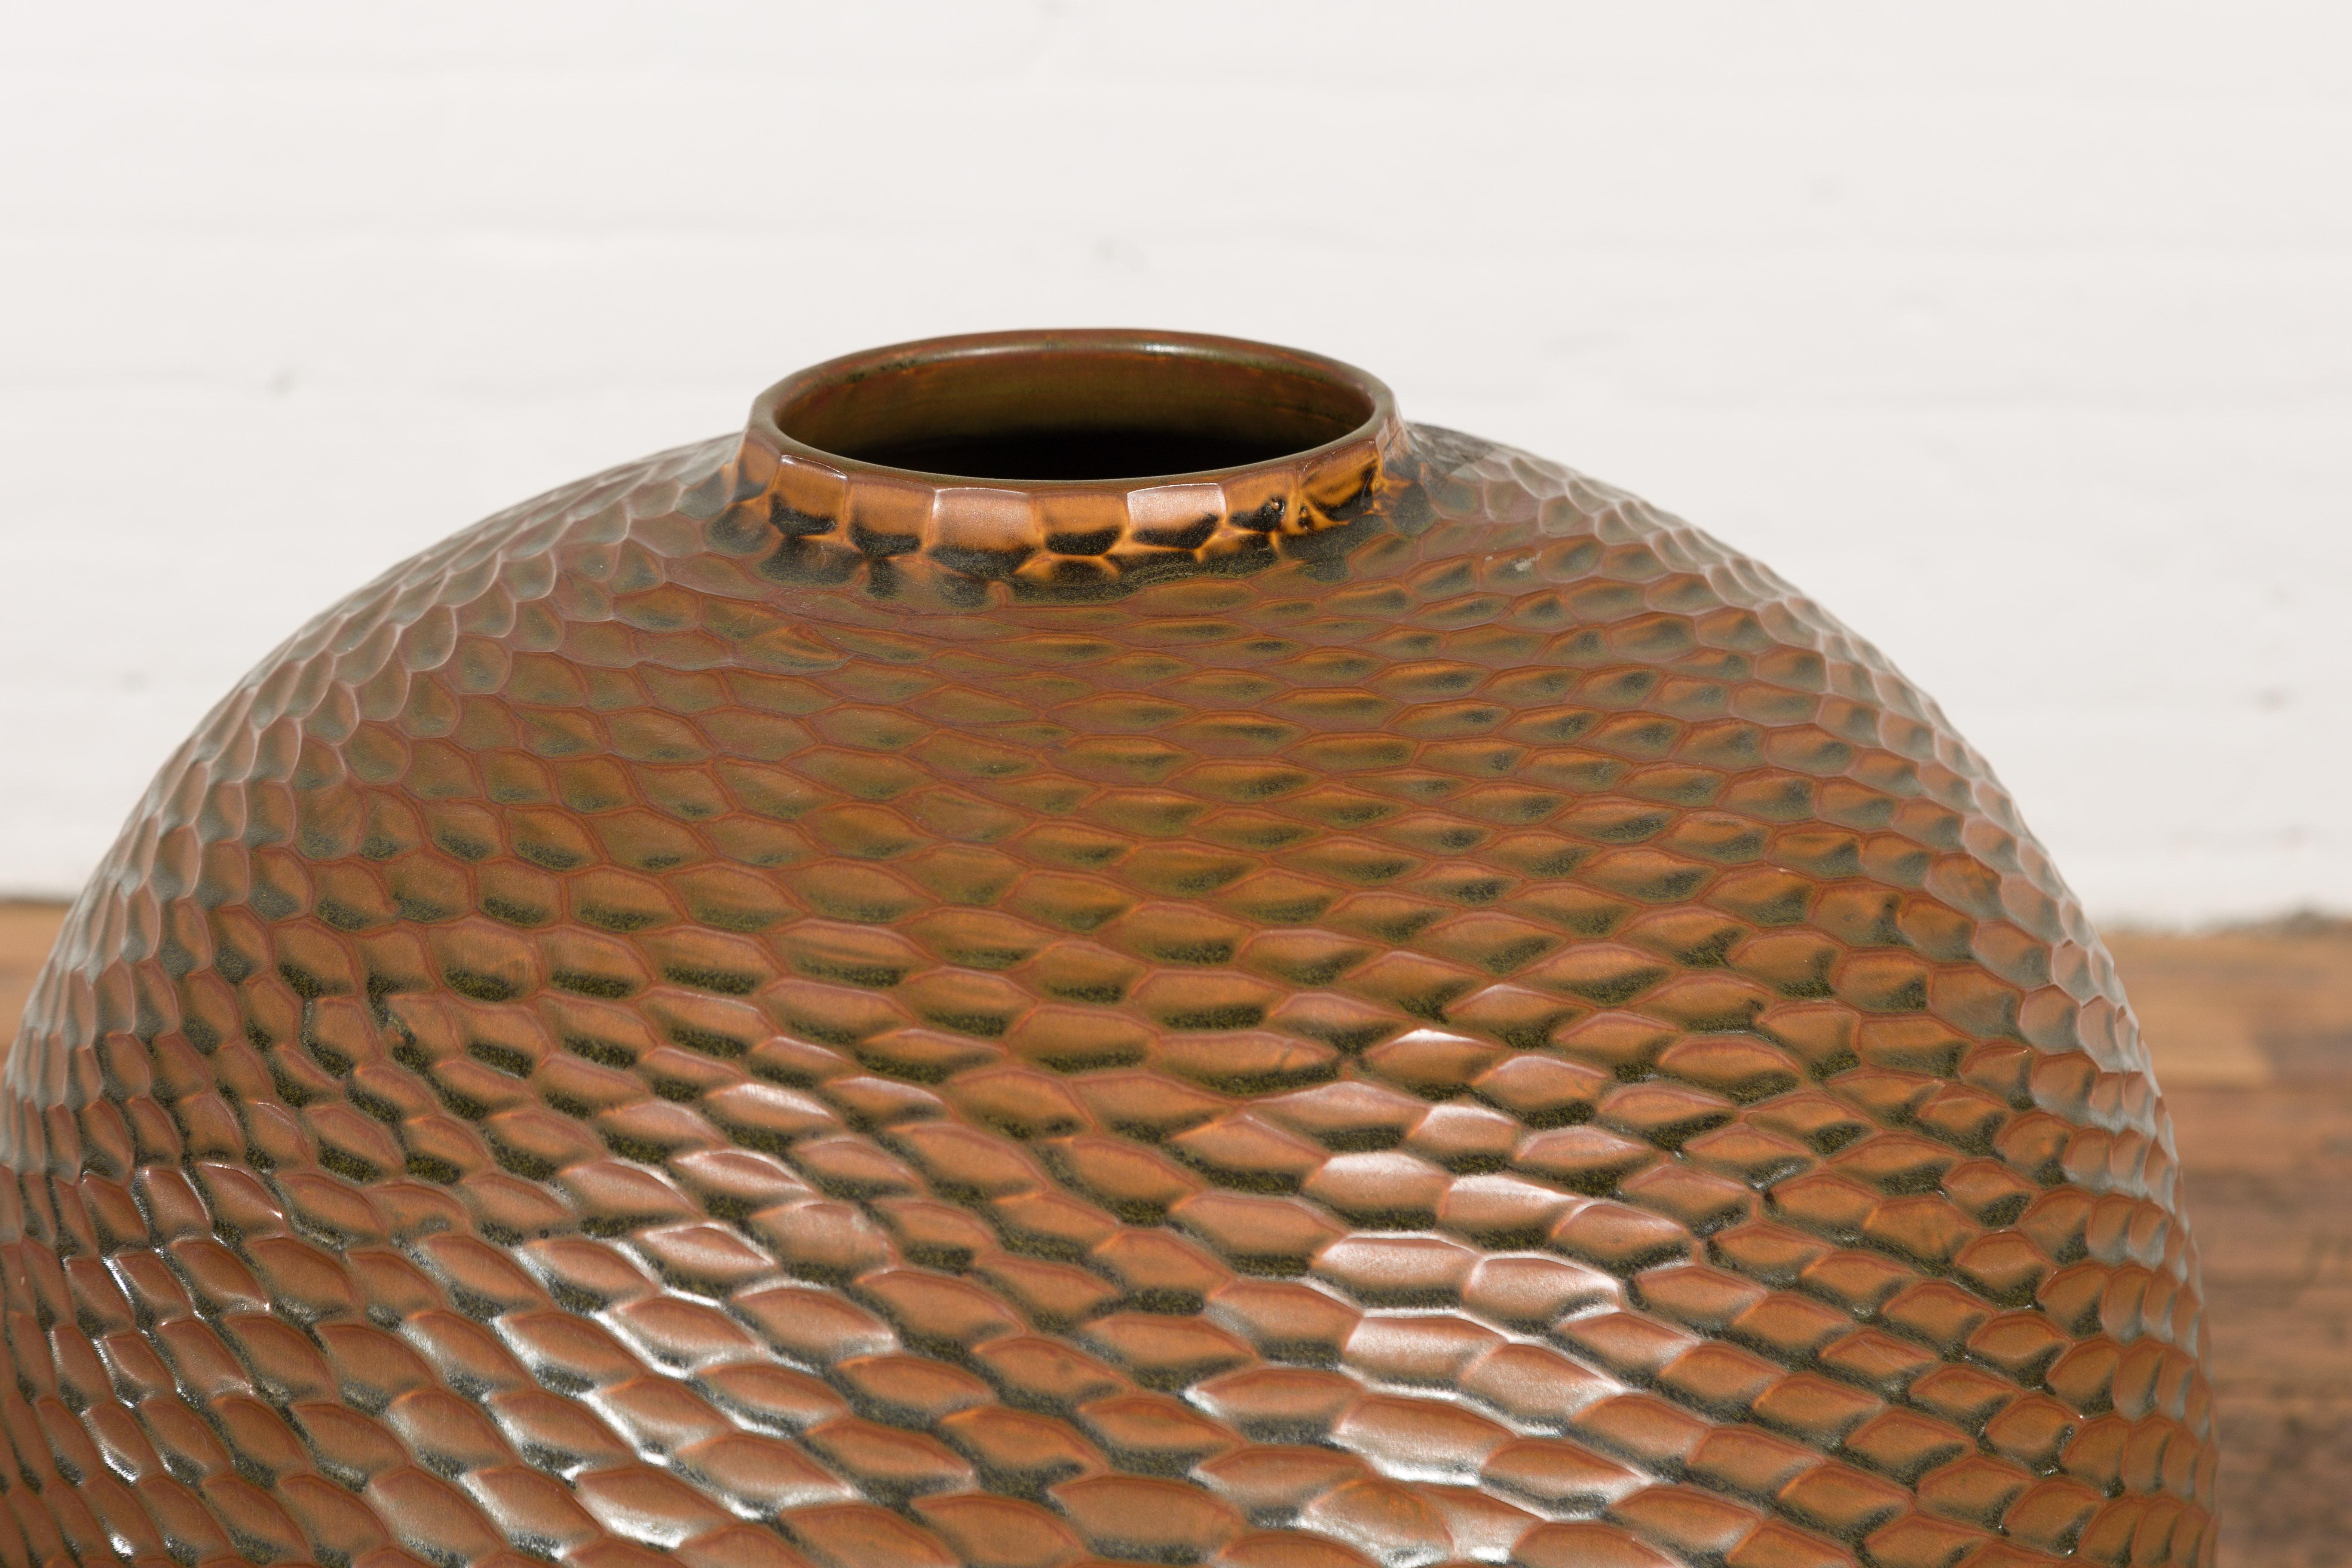 Prem Collection Handcrafted Brown Vase with Textured Honeycomb Style Motifs In Good Condition For Sale In Yonkers, NY